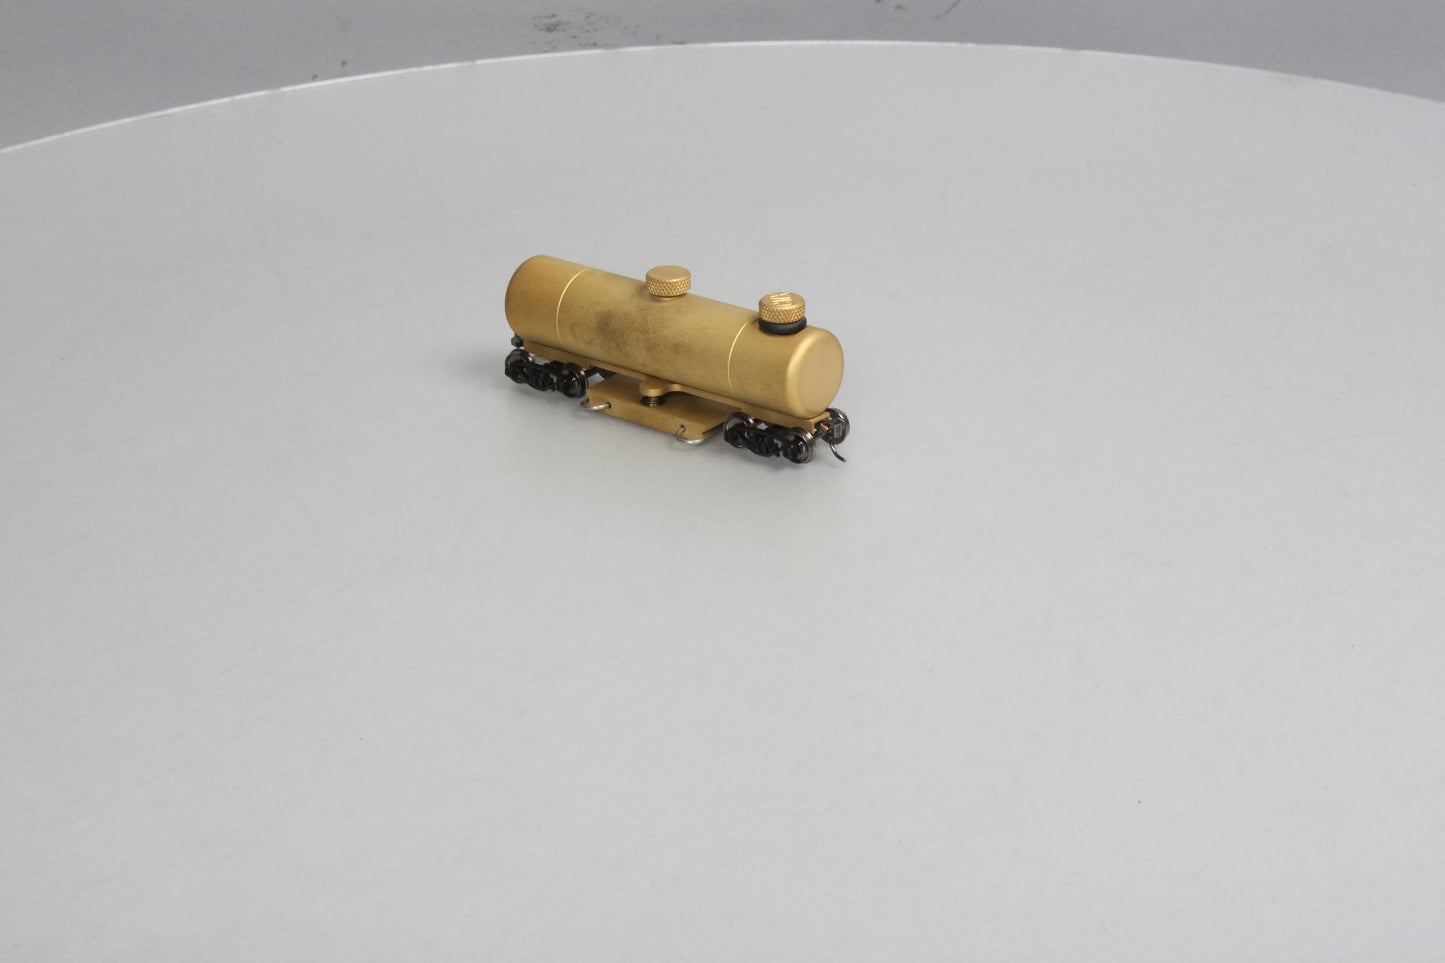 CMX Products HO Scale BRASS "Clean Machine" Track Cleaner Car